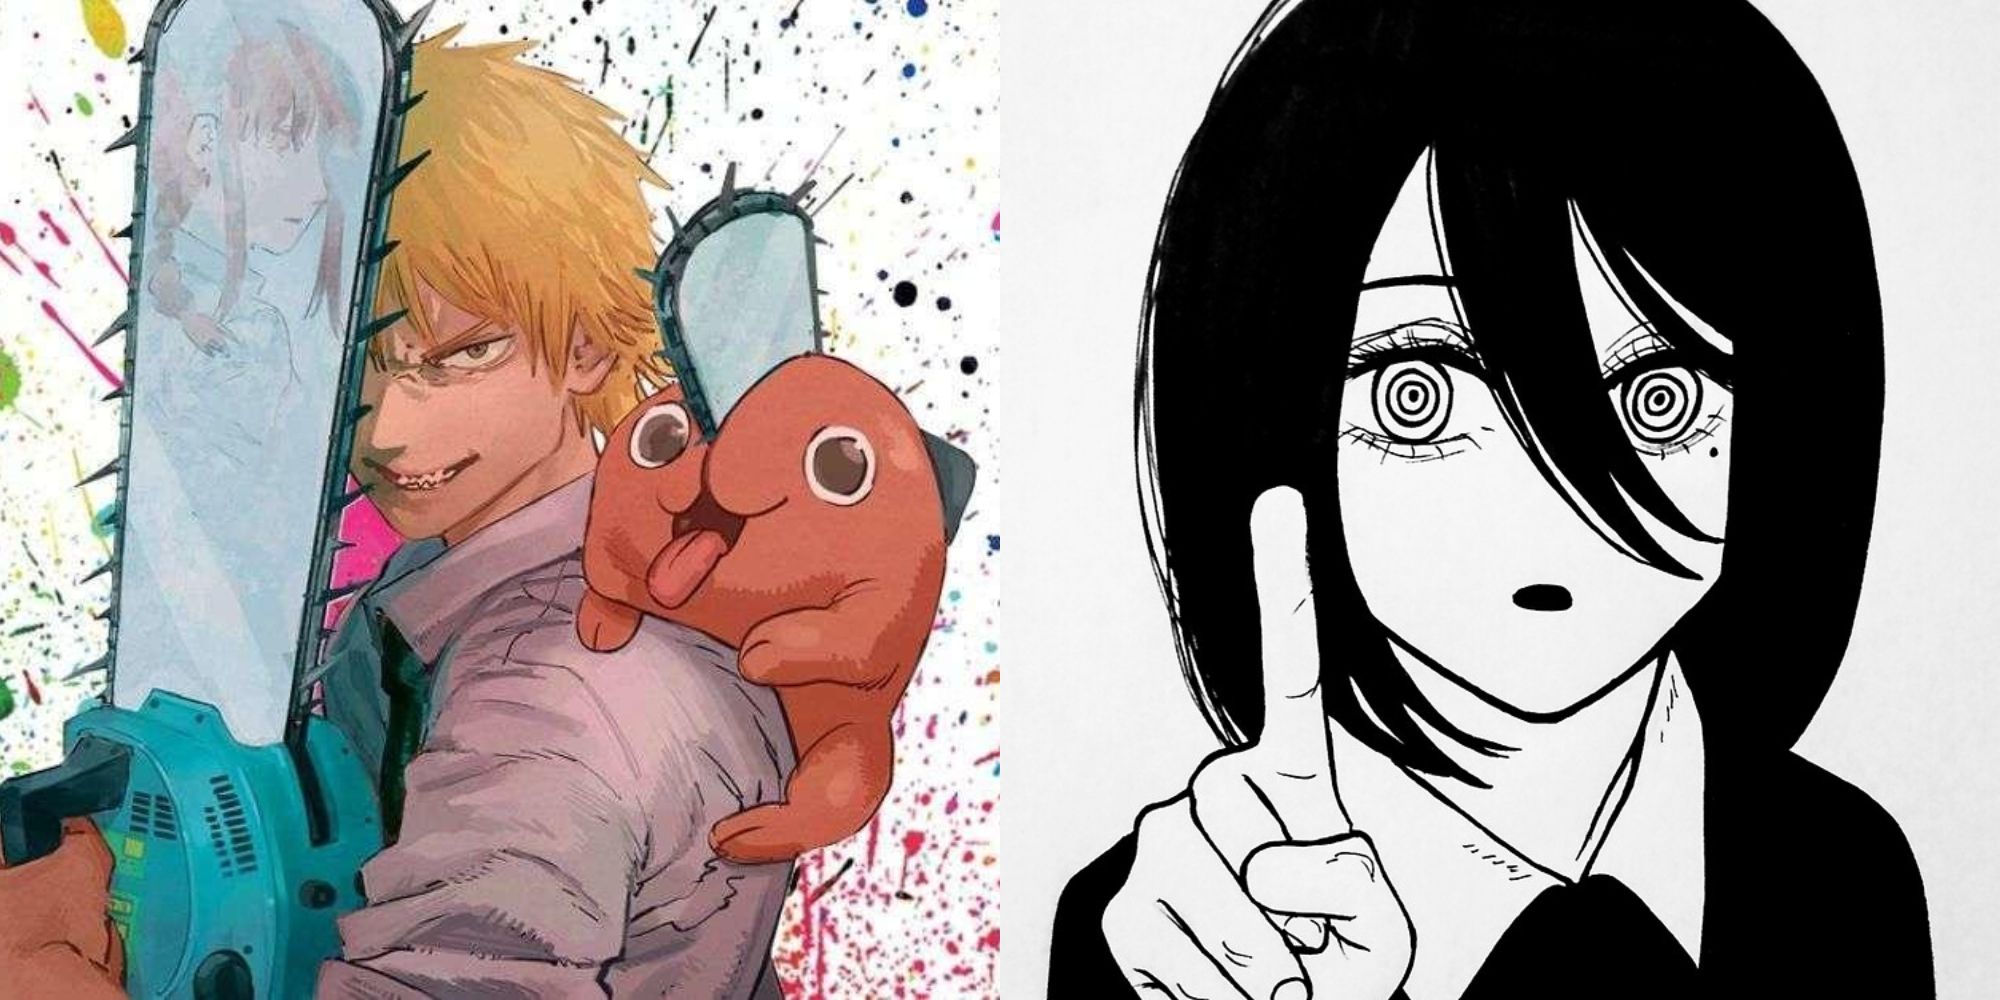 Will Power return in the Chainsaw Man manga? Explained